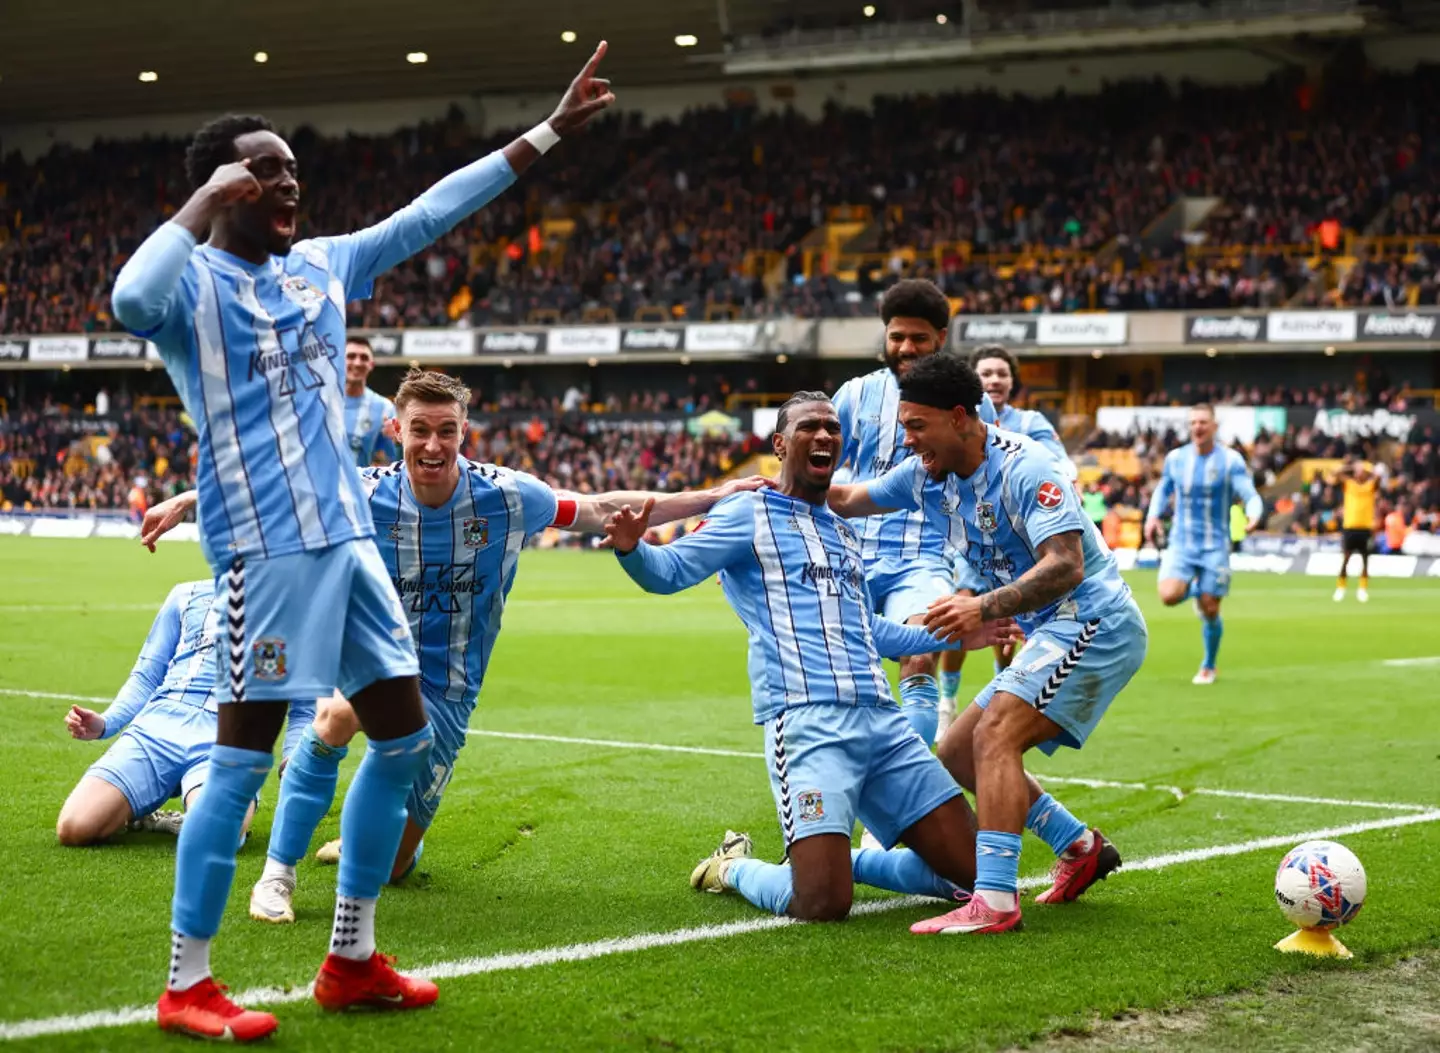 Haji Wright celebrates scoring Coventry's winning goal in their 3-2 victory over Wolves (